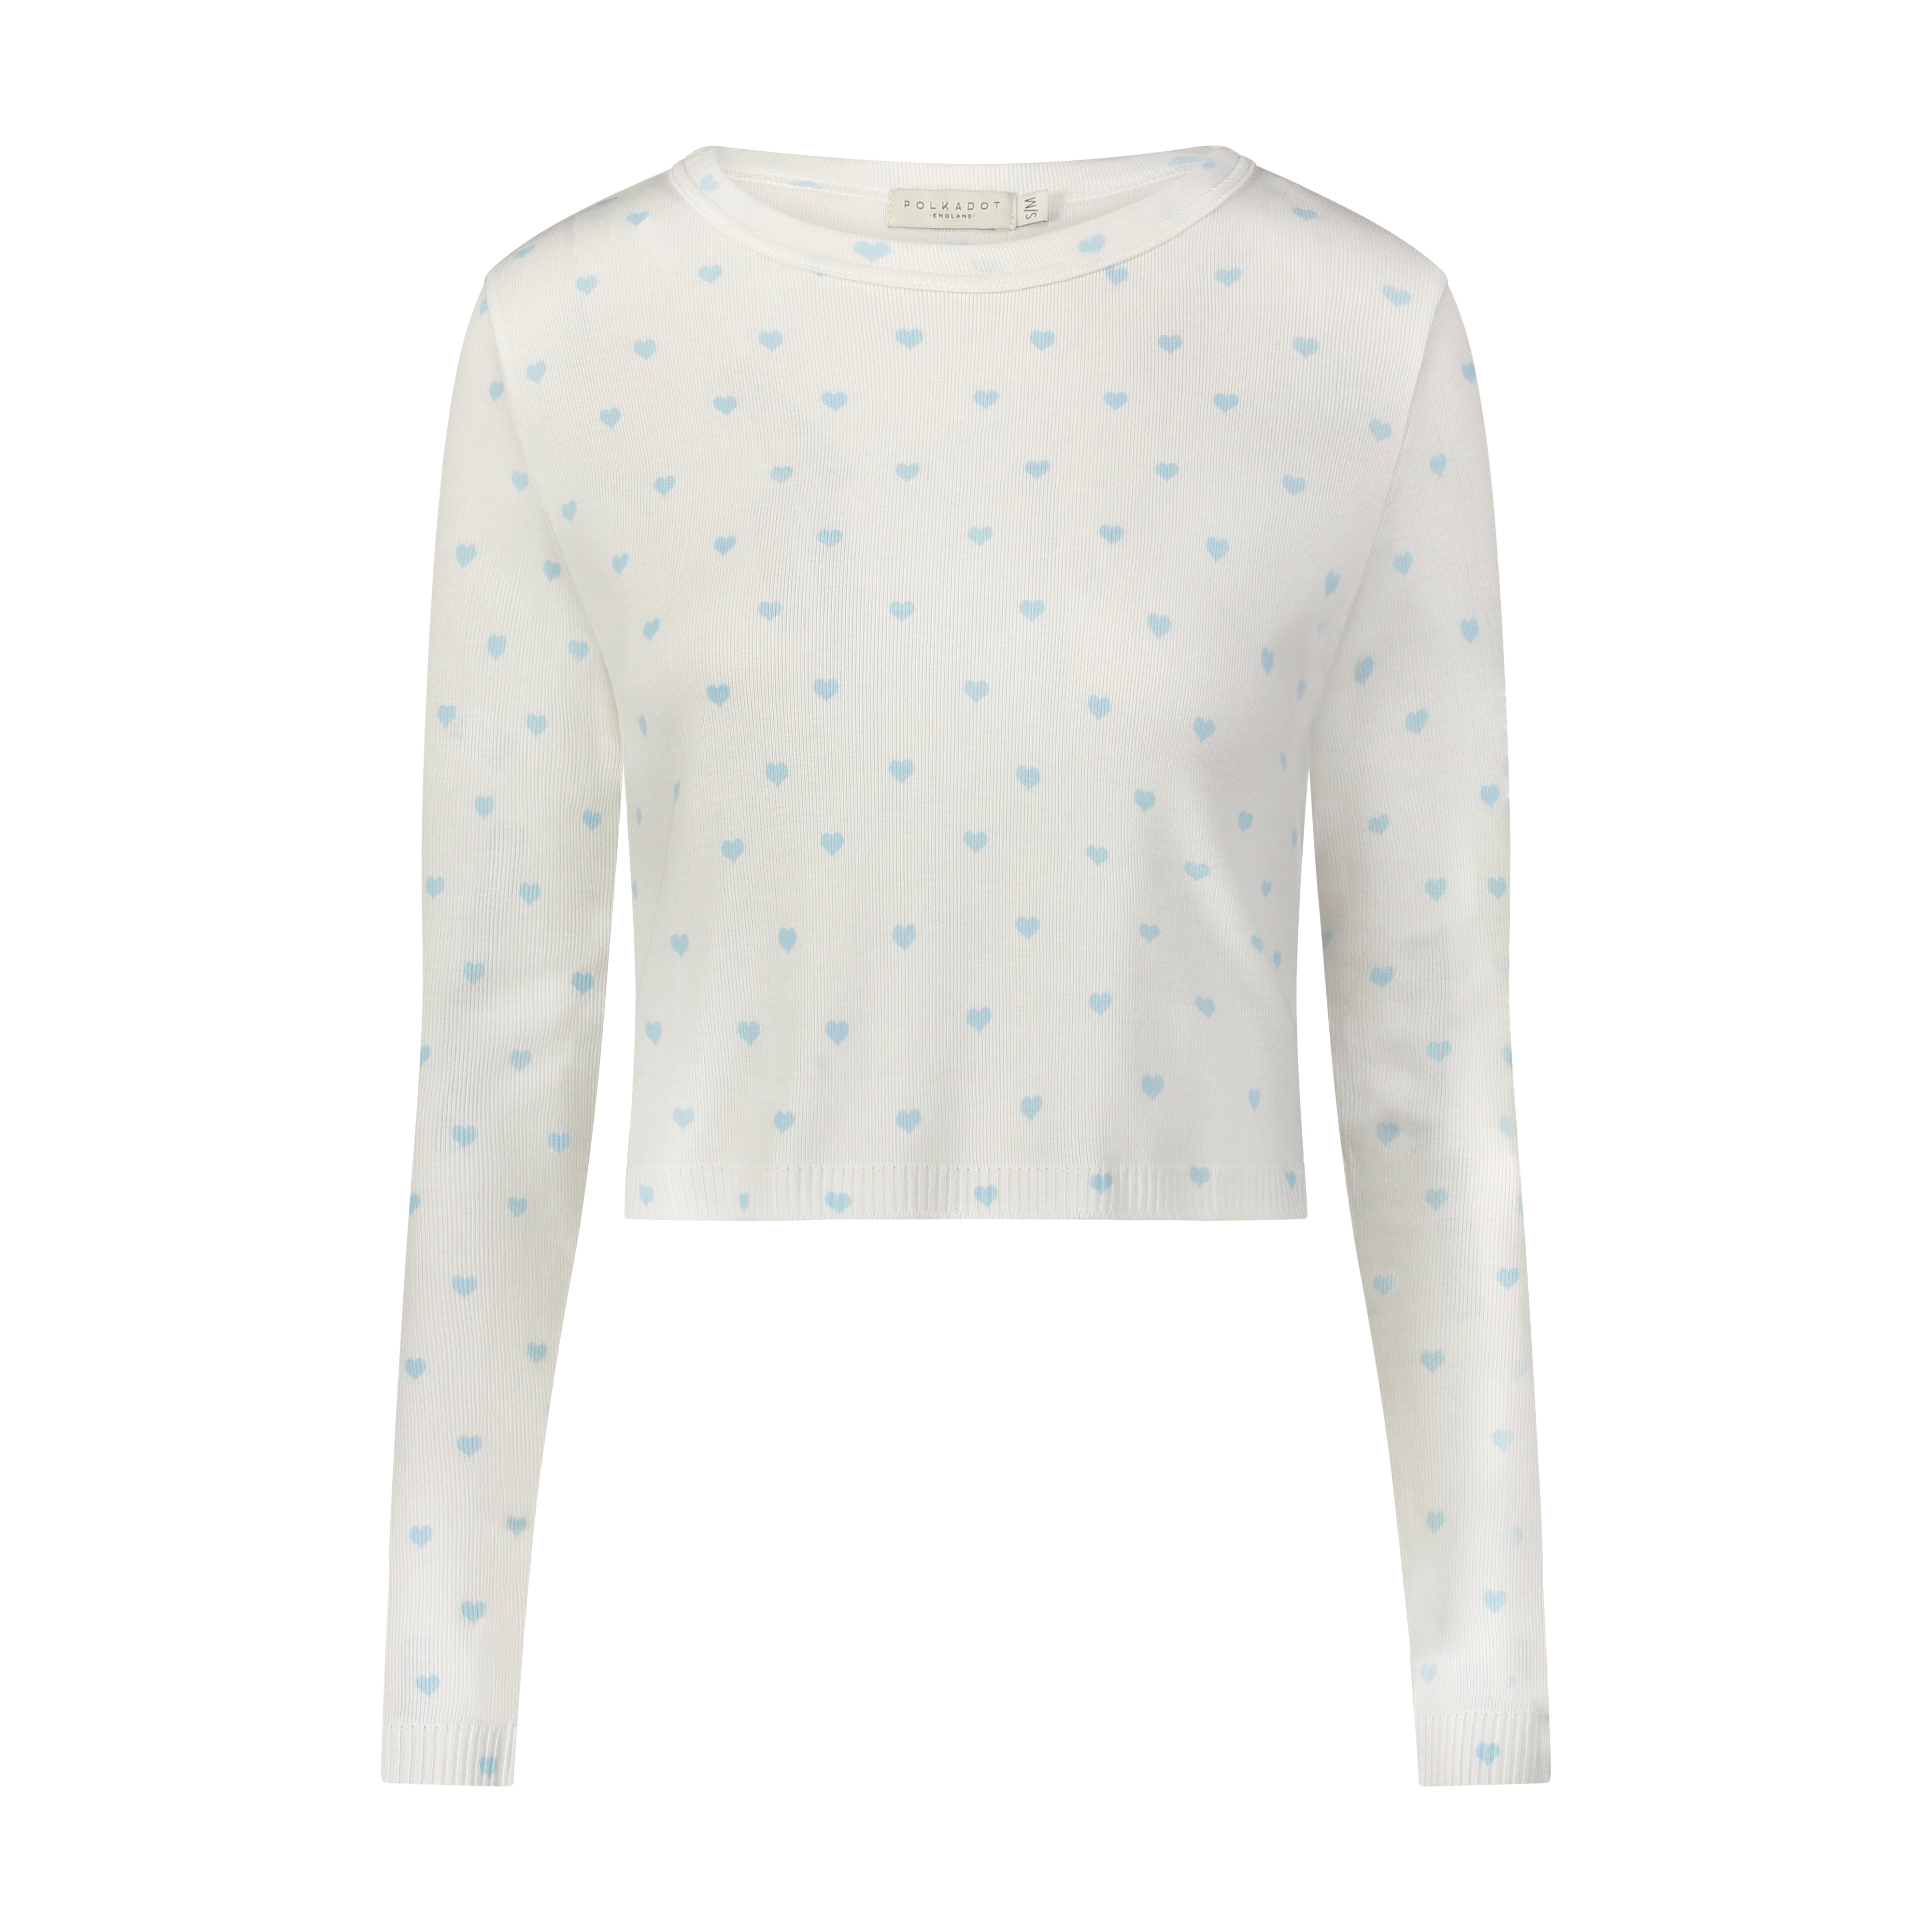 NELL CROP SLOUCHY Blue Hearts Print